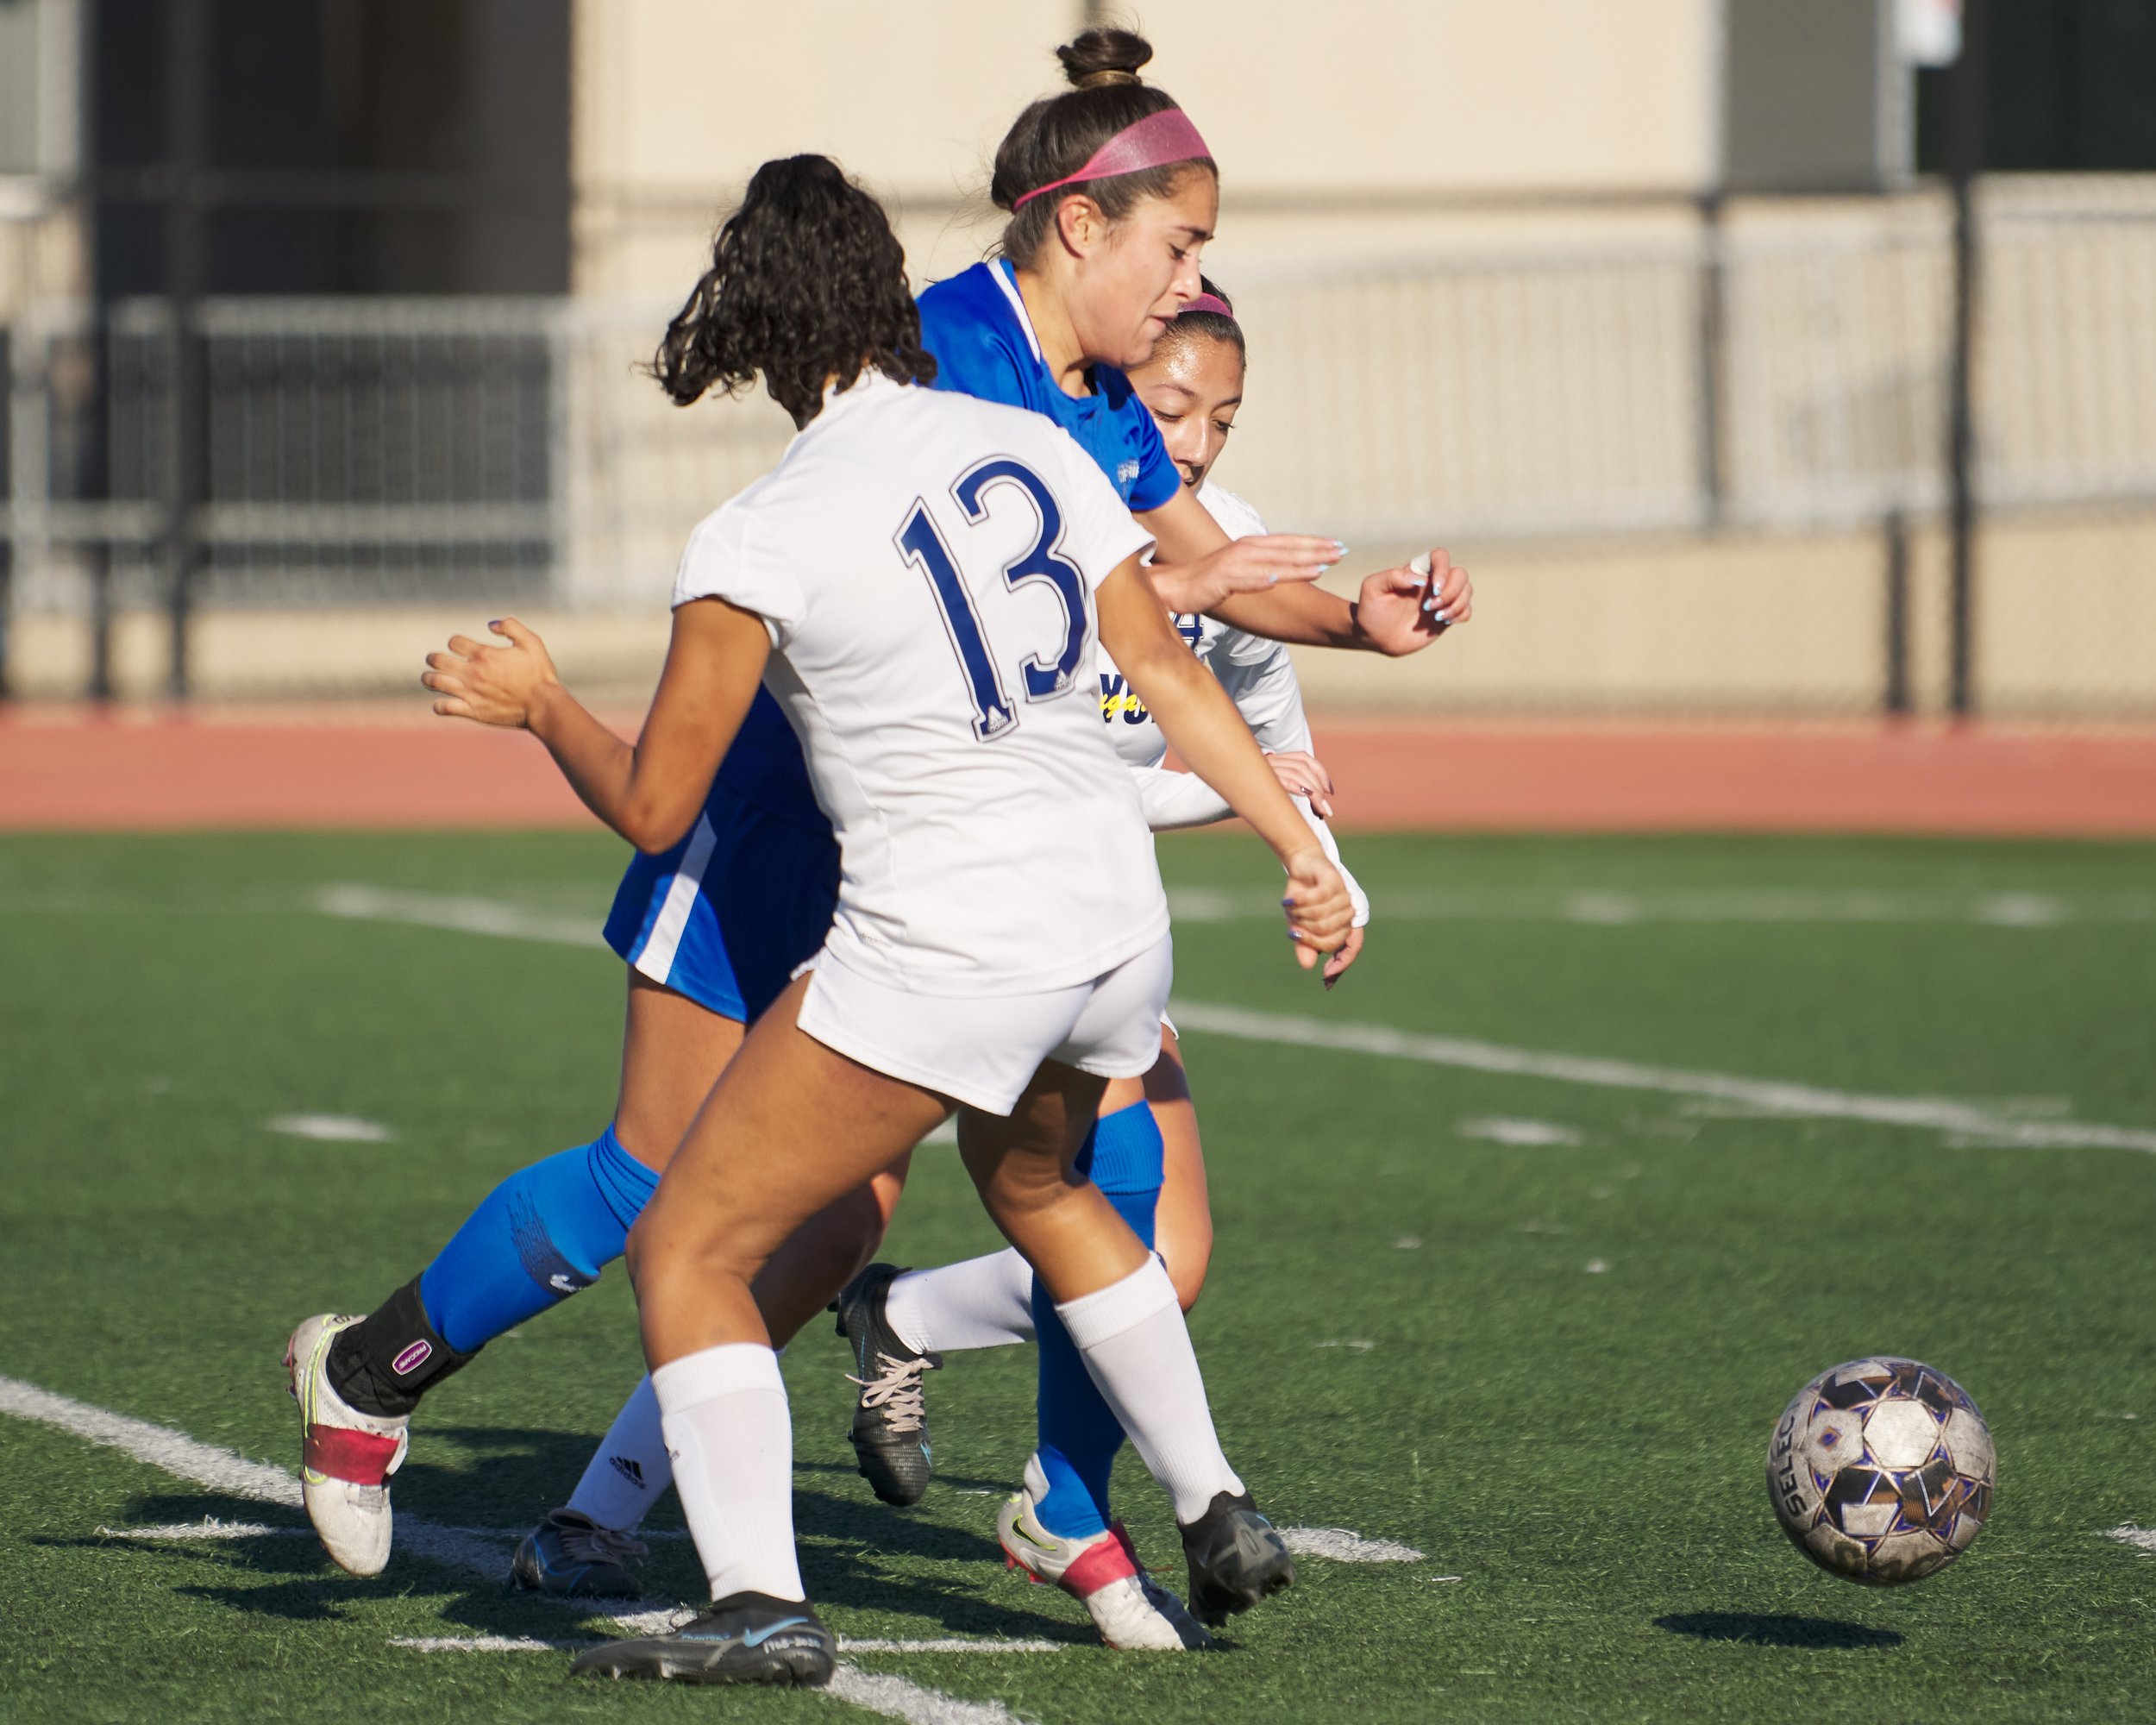  College of the Canyons Cougars' Natalia Zuluaga Ramirez (13) and Giselle Gomez (rear) gain the ball from Santa Monica College Corsairs' Ali Alban (center) during the women's soccer match on Thursday, Nov. 10, 2022, at Corsair Field in Santa Monica, 